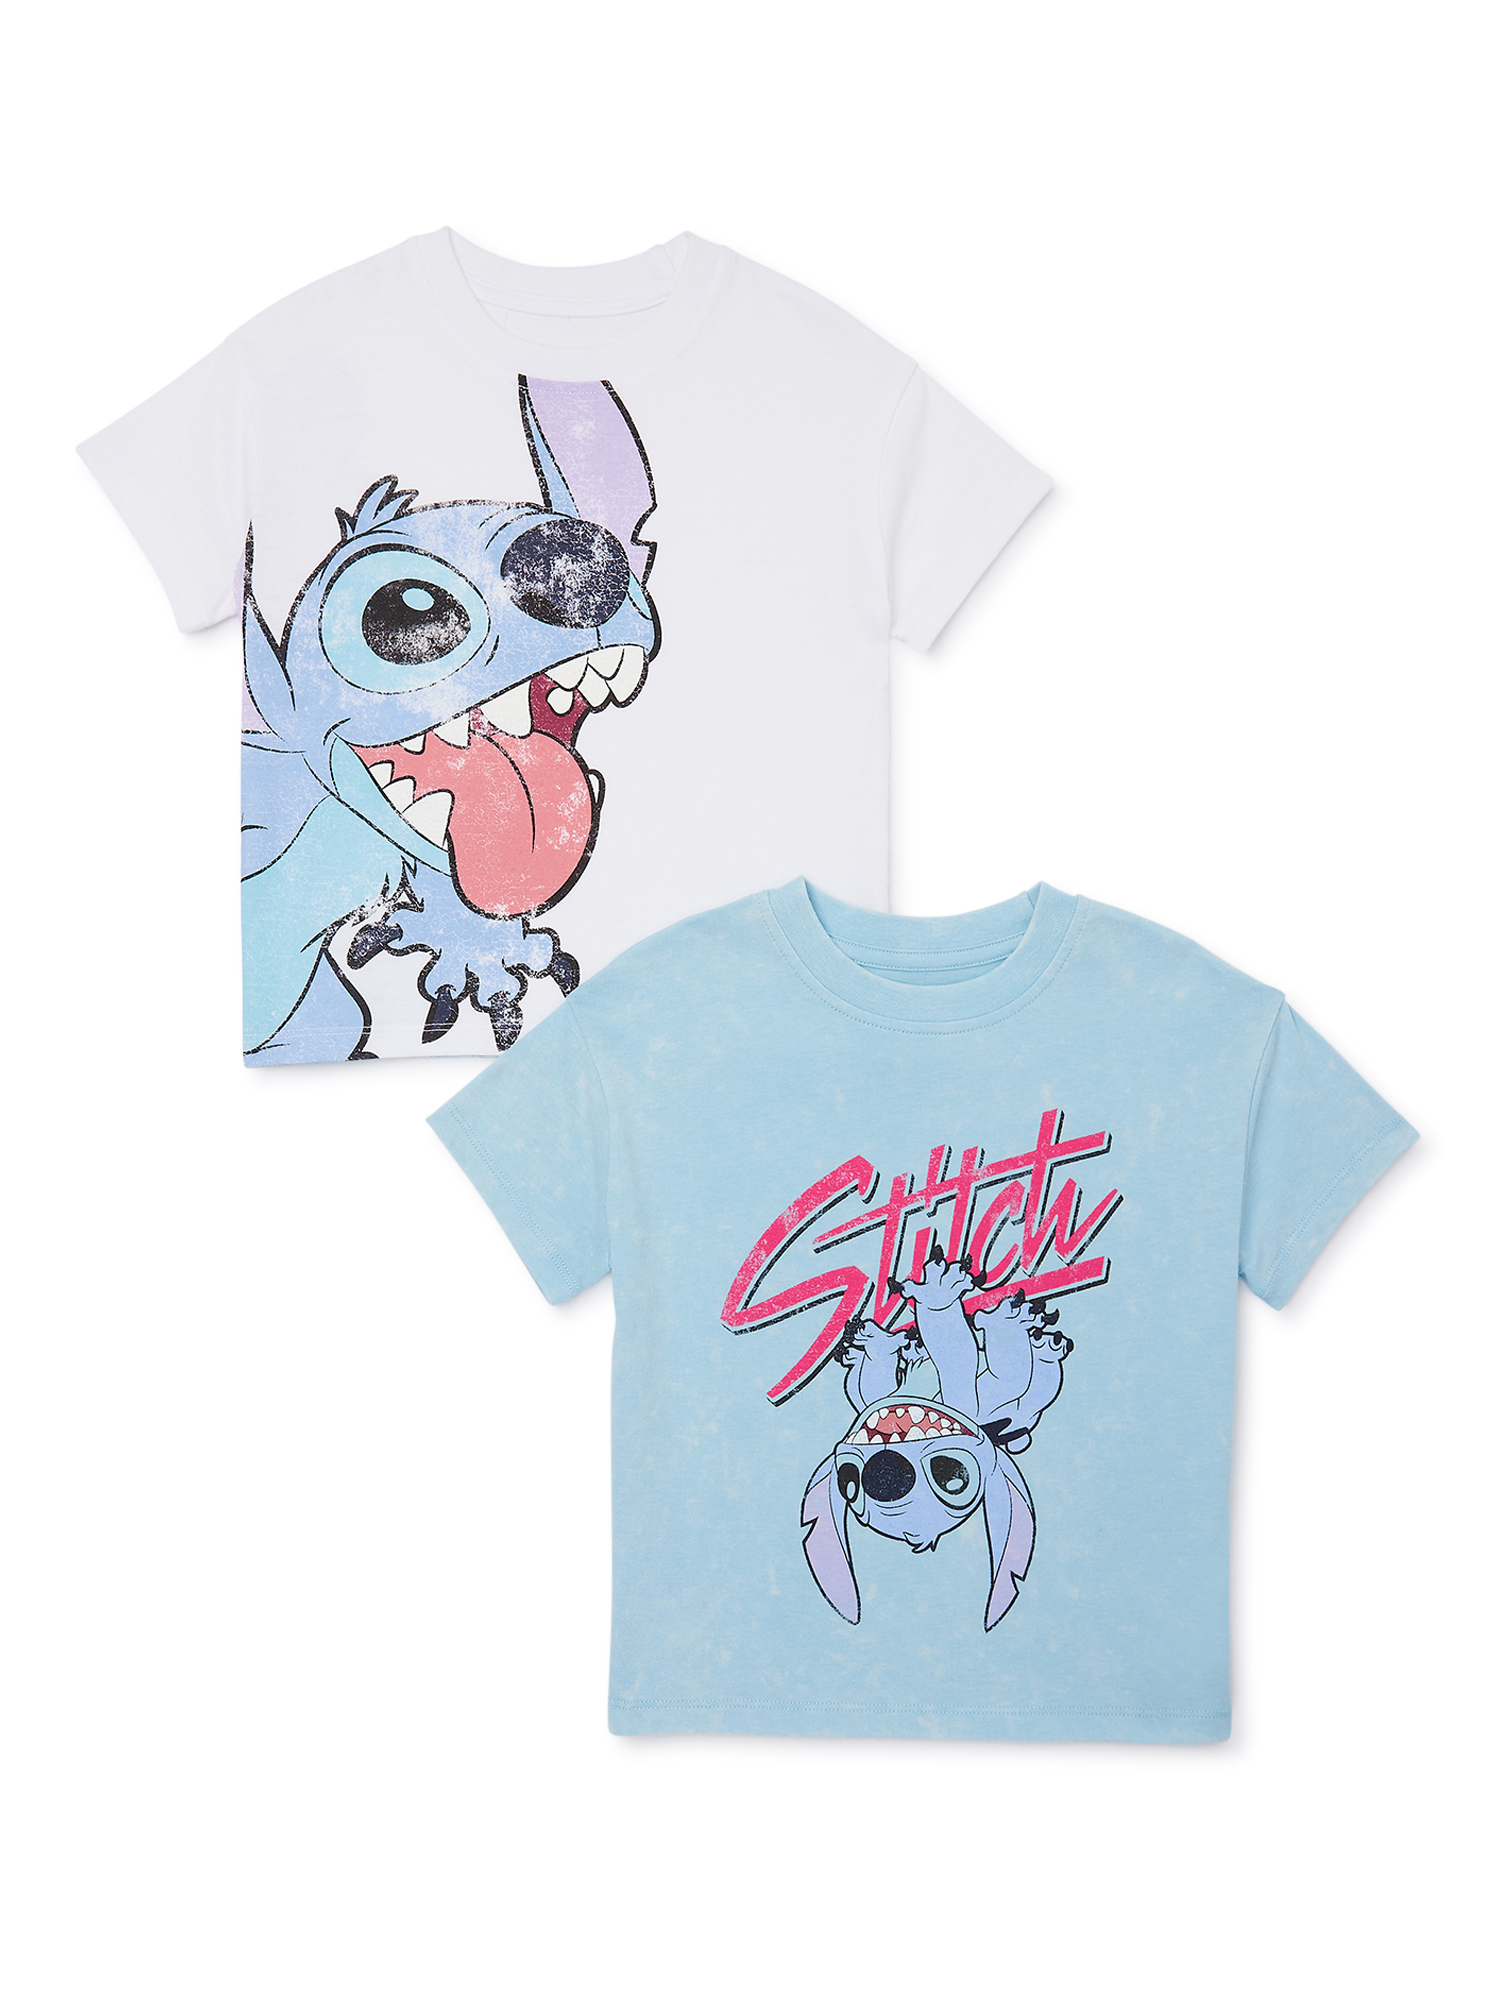 Stitch Toddler Boy Graphic Tees, 2-Pack, Sizes 2T-5T - image 1 of 8